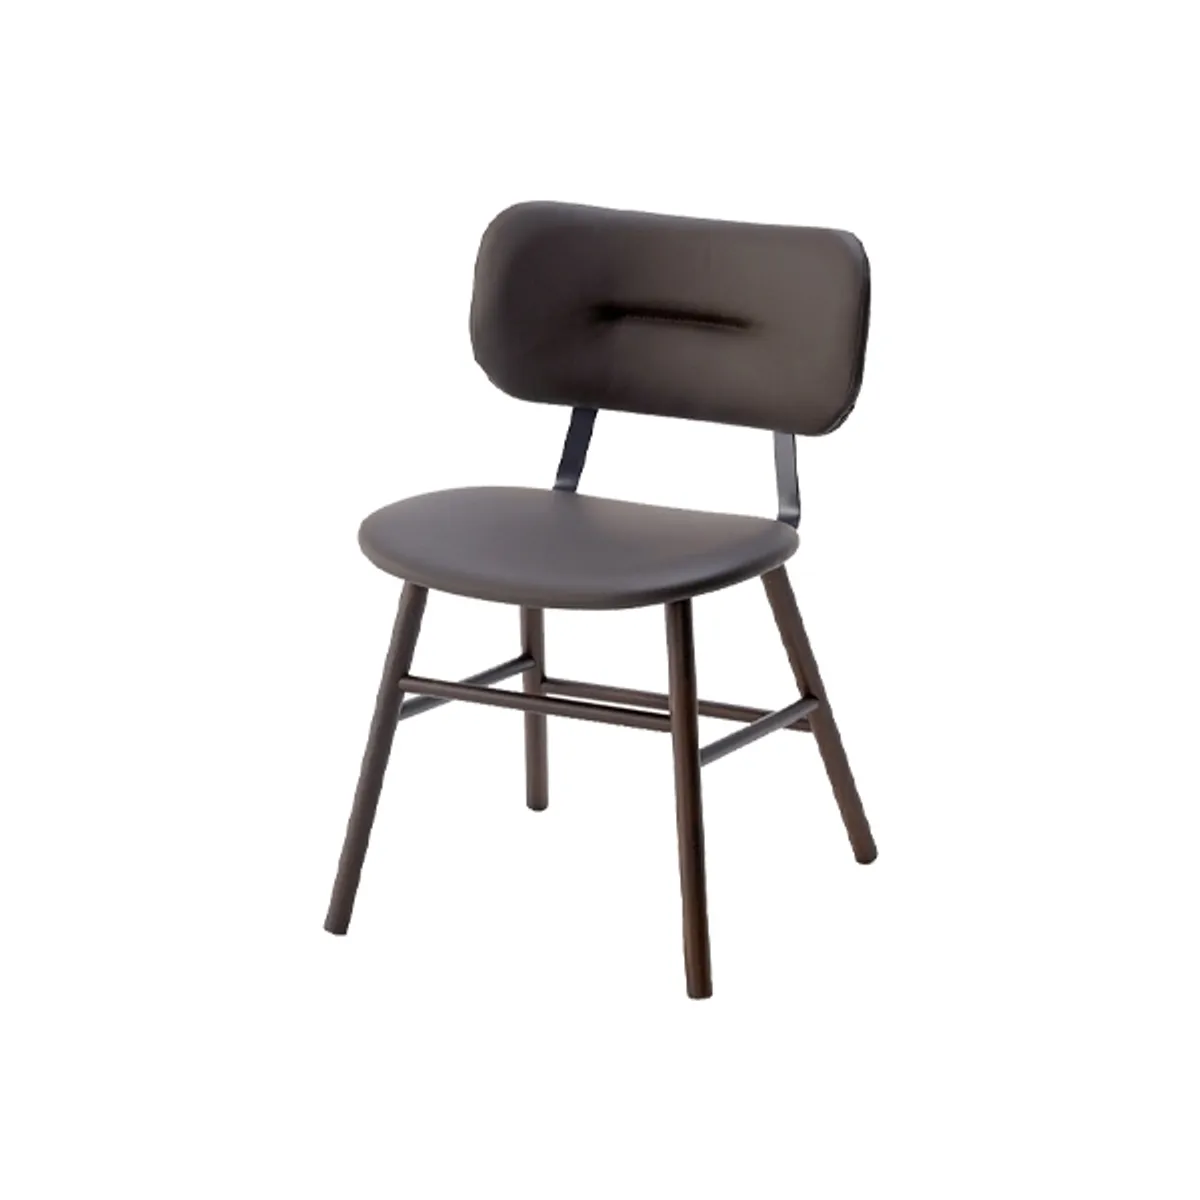 Demie chair Inside Out Contracts4